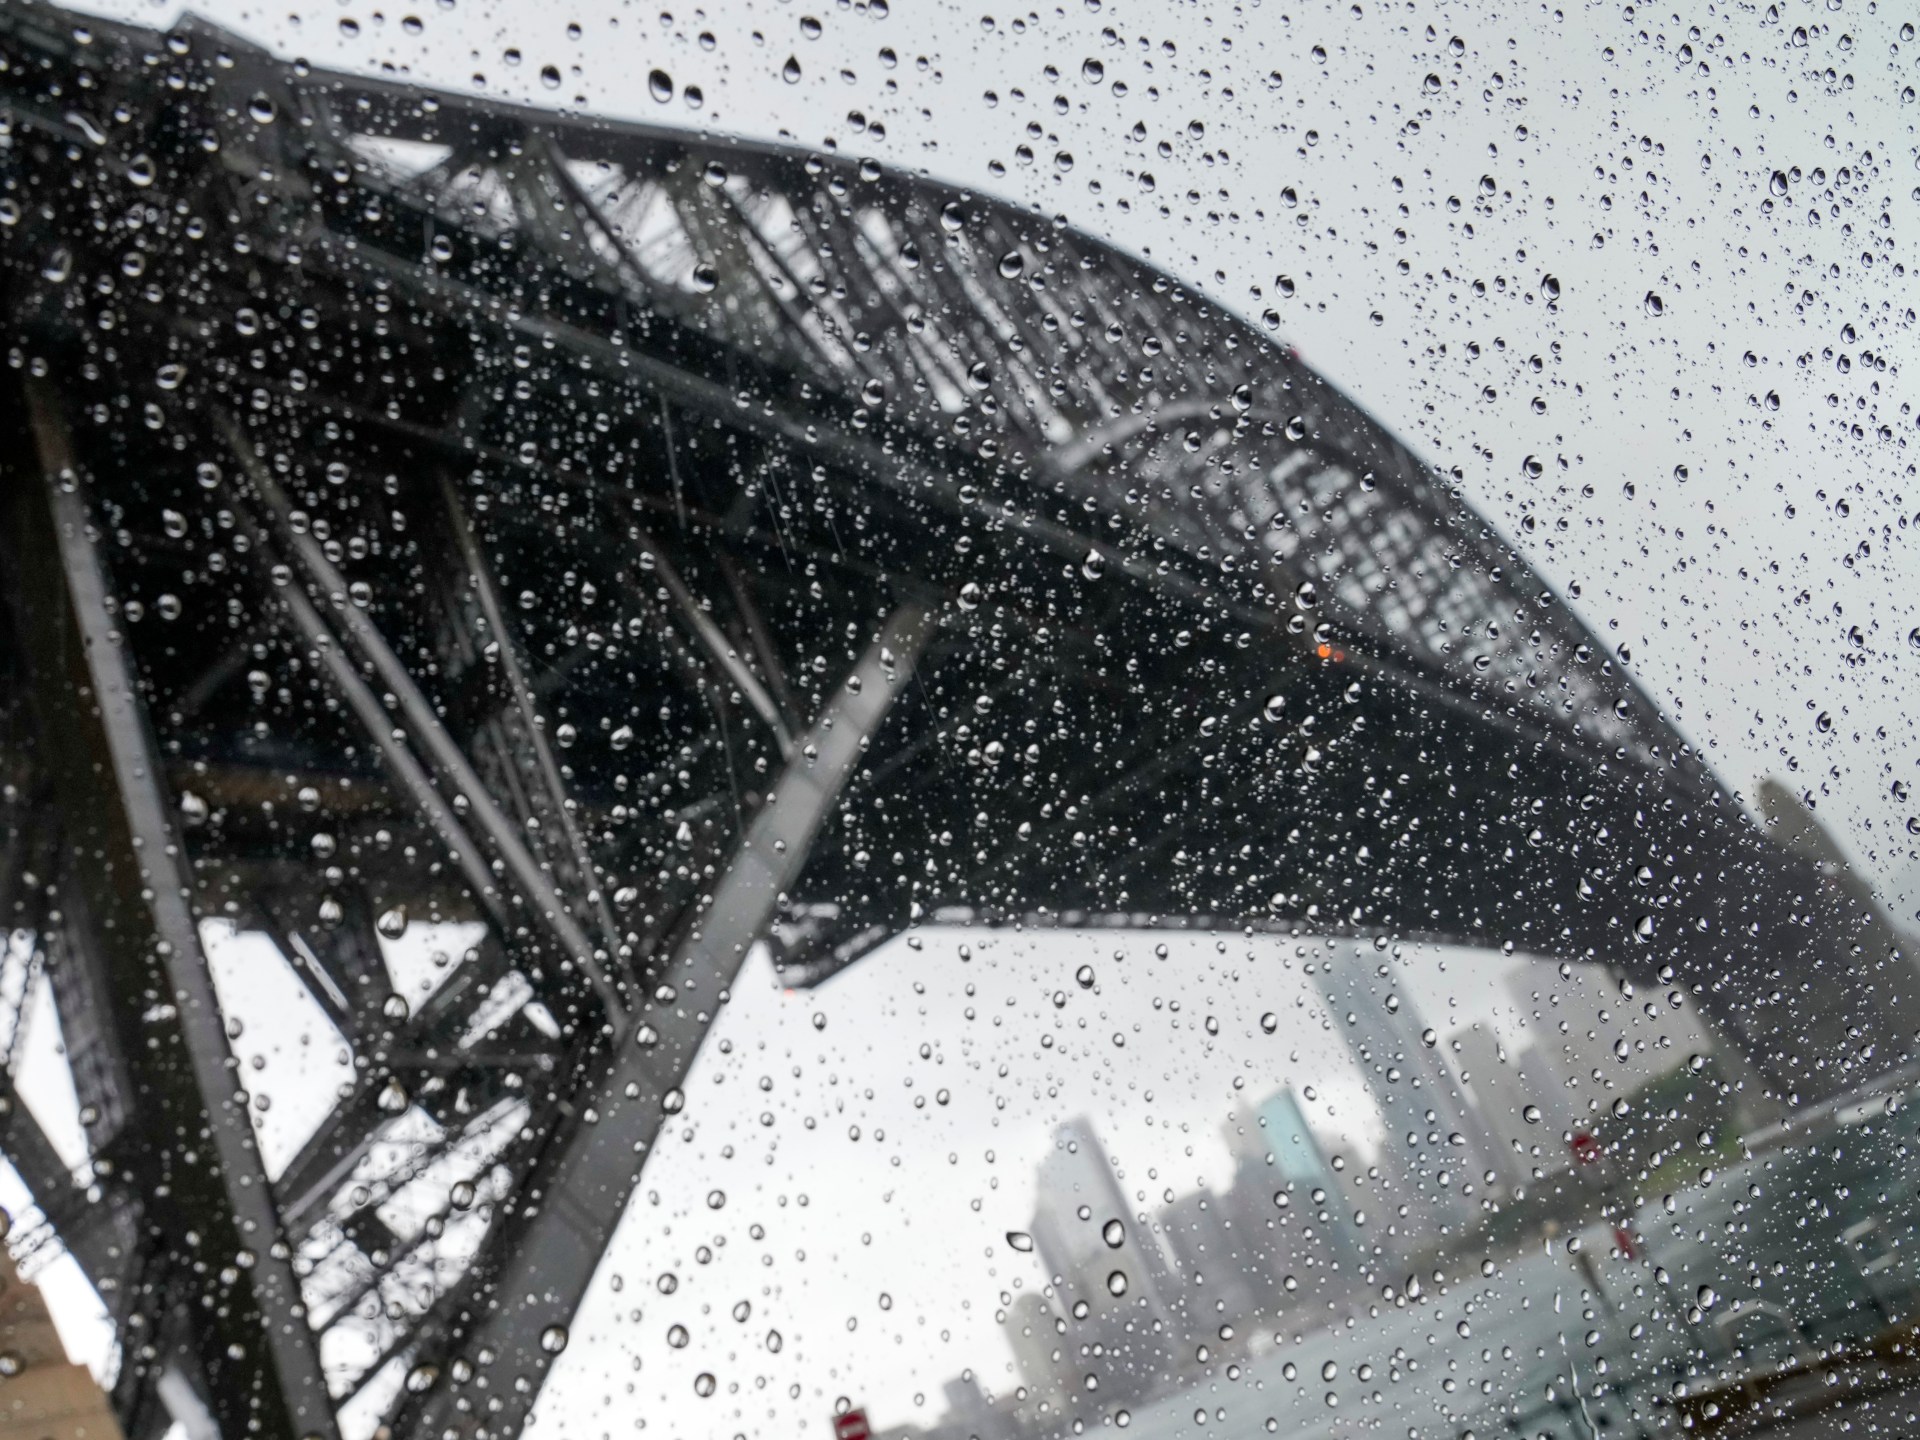 Sydney records wettest year since records began in 1858